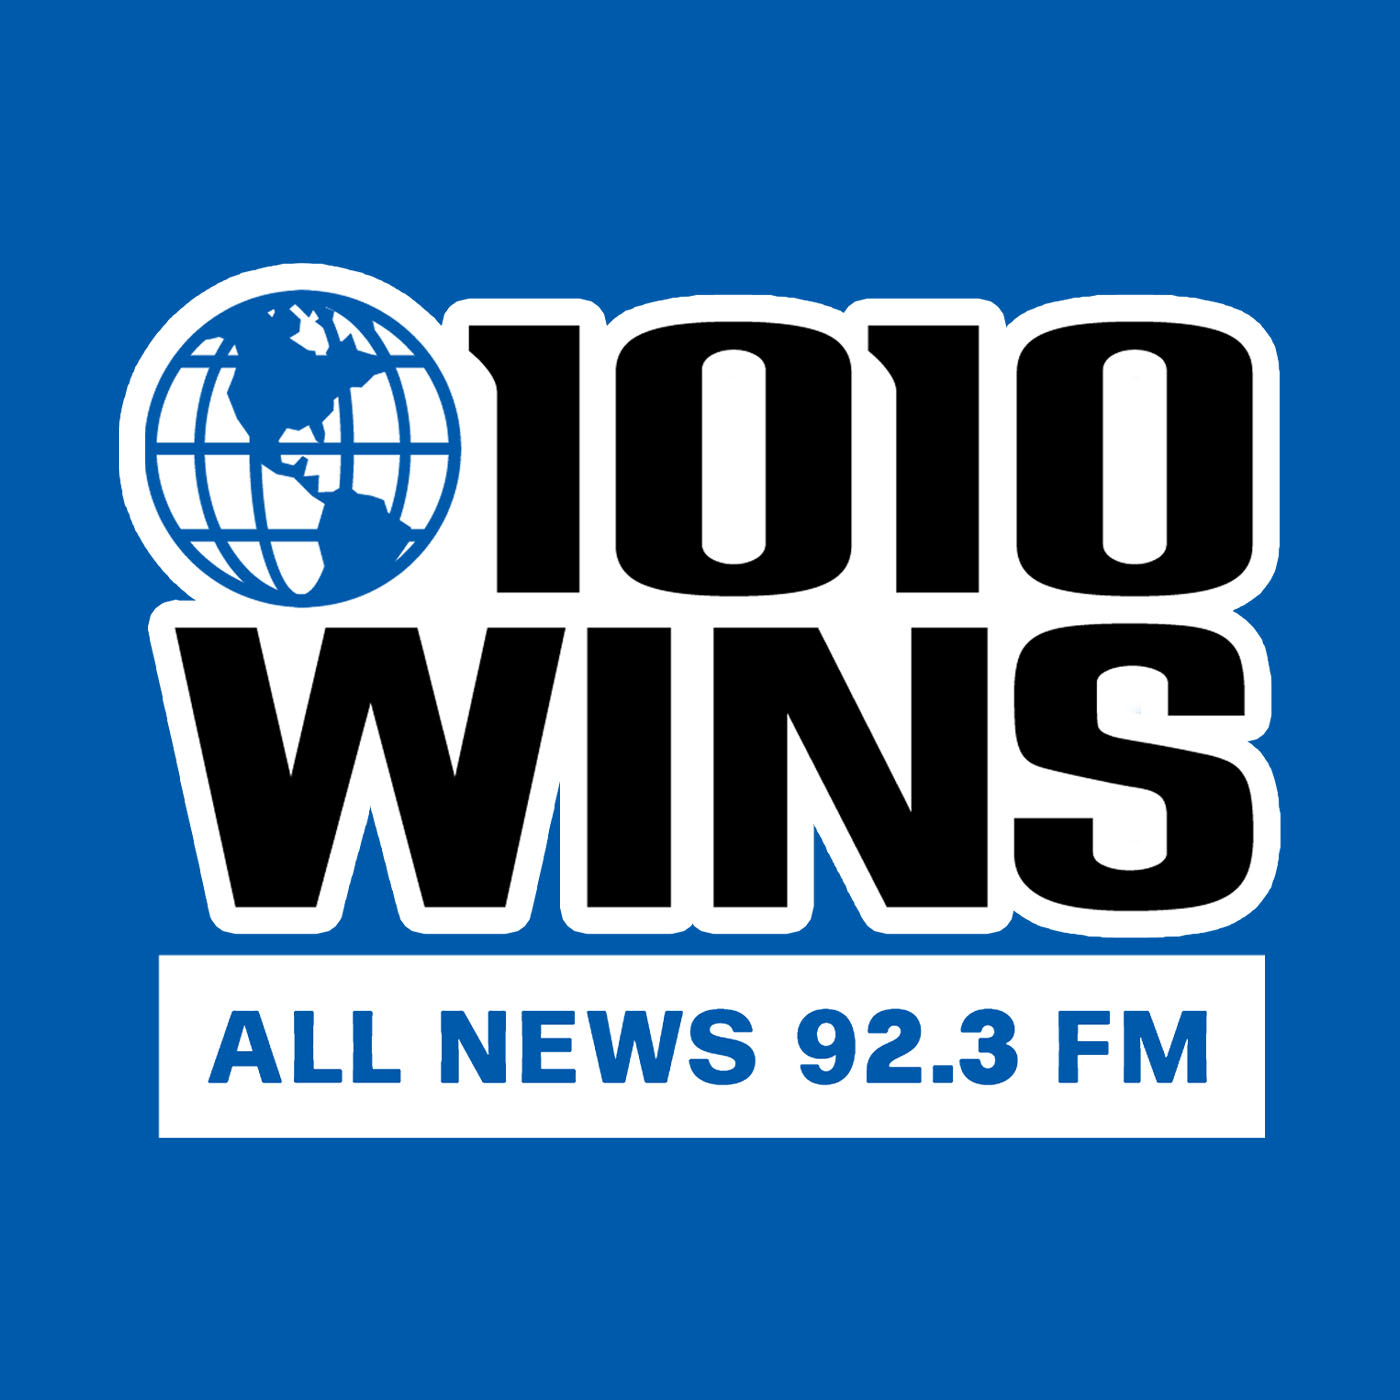 1010 WINS thanks Andrew Wong, a critical care practitioner for Northwell Health.